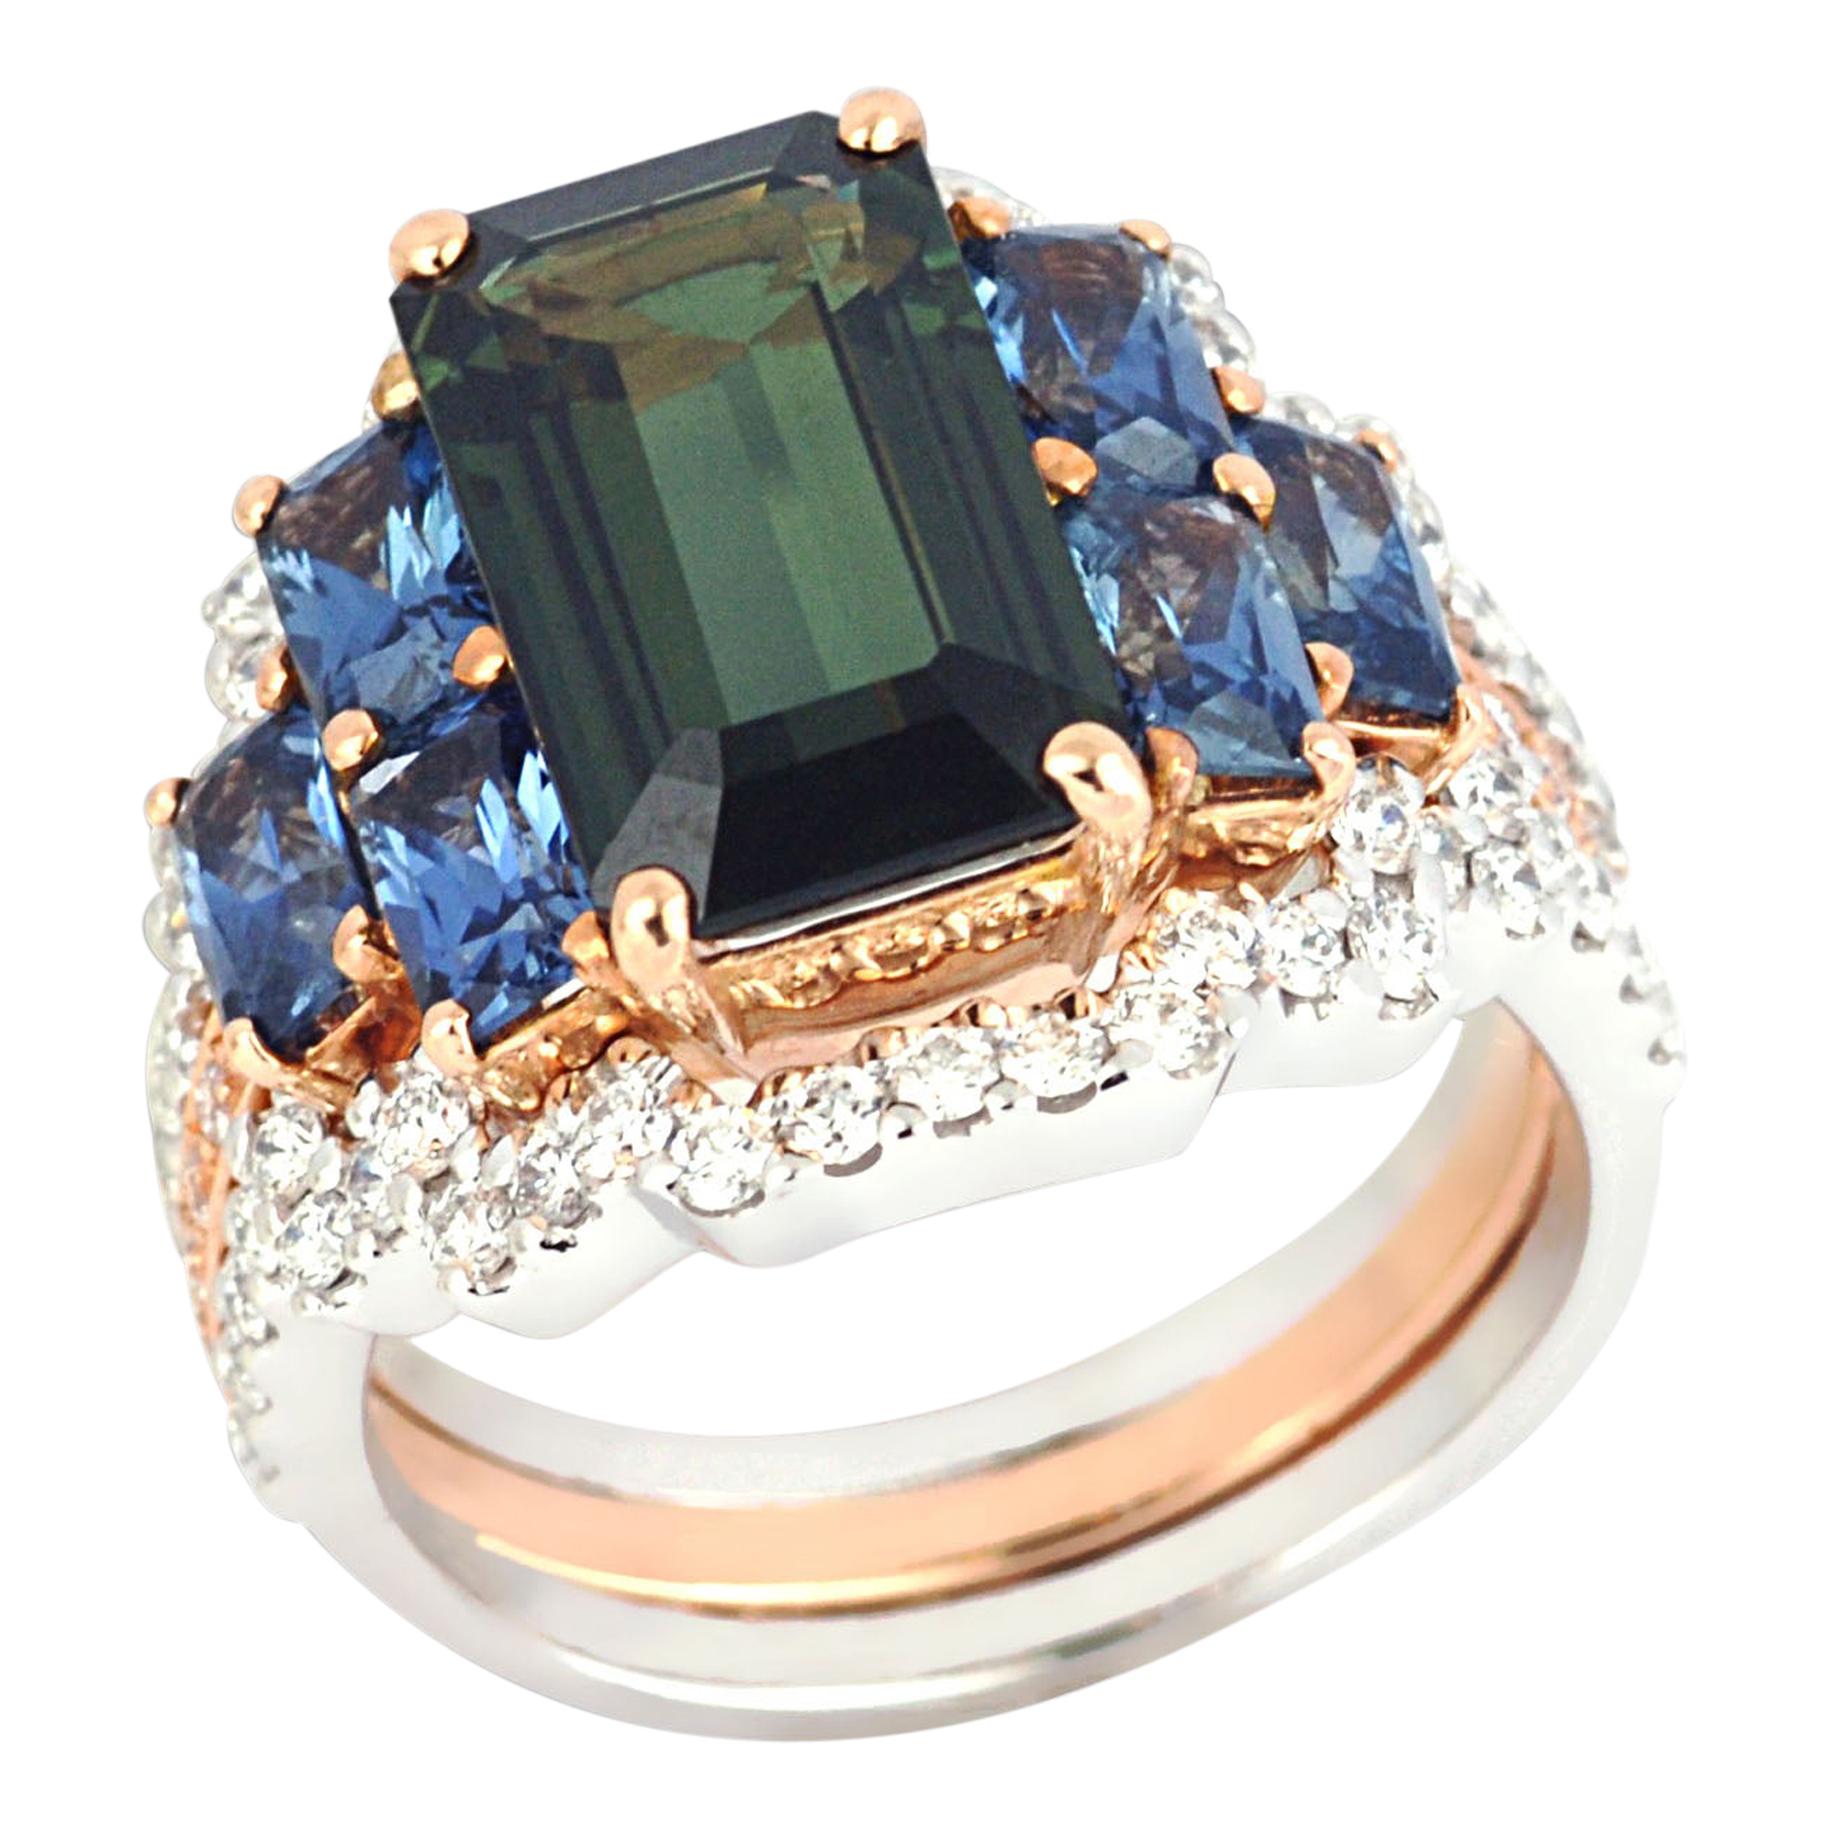 Green Sapphire, Blue Sapphire with Jacket Diamond Ring in 18K White/Pink Gold